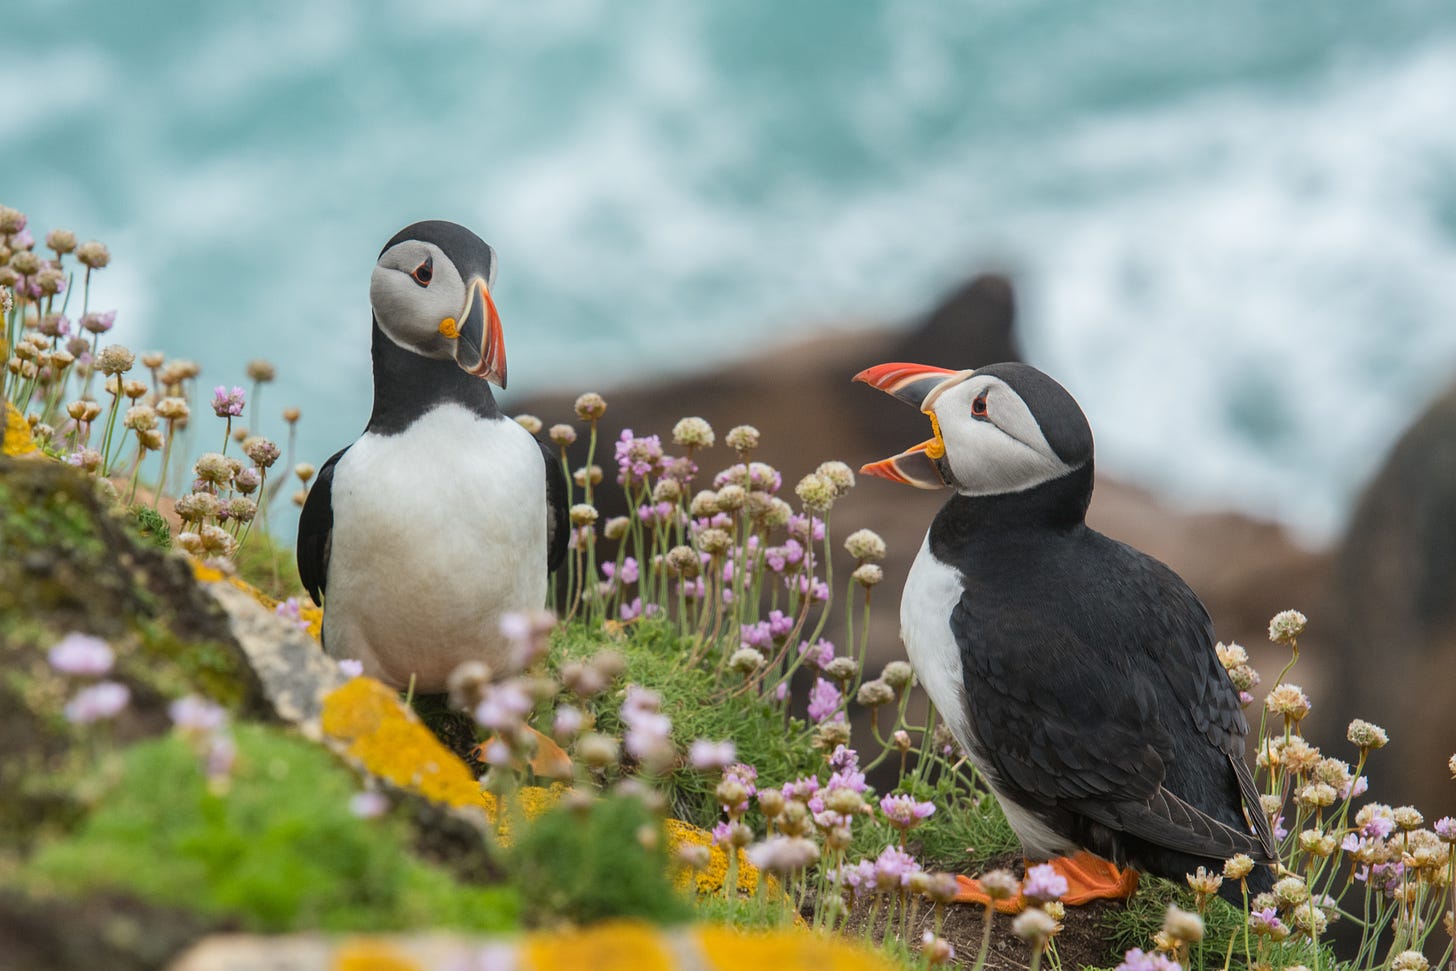 Two puffins appearing to be conversing among purple wildflowers on a rocky coastal island in Ireland